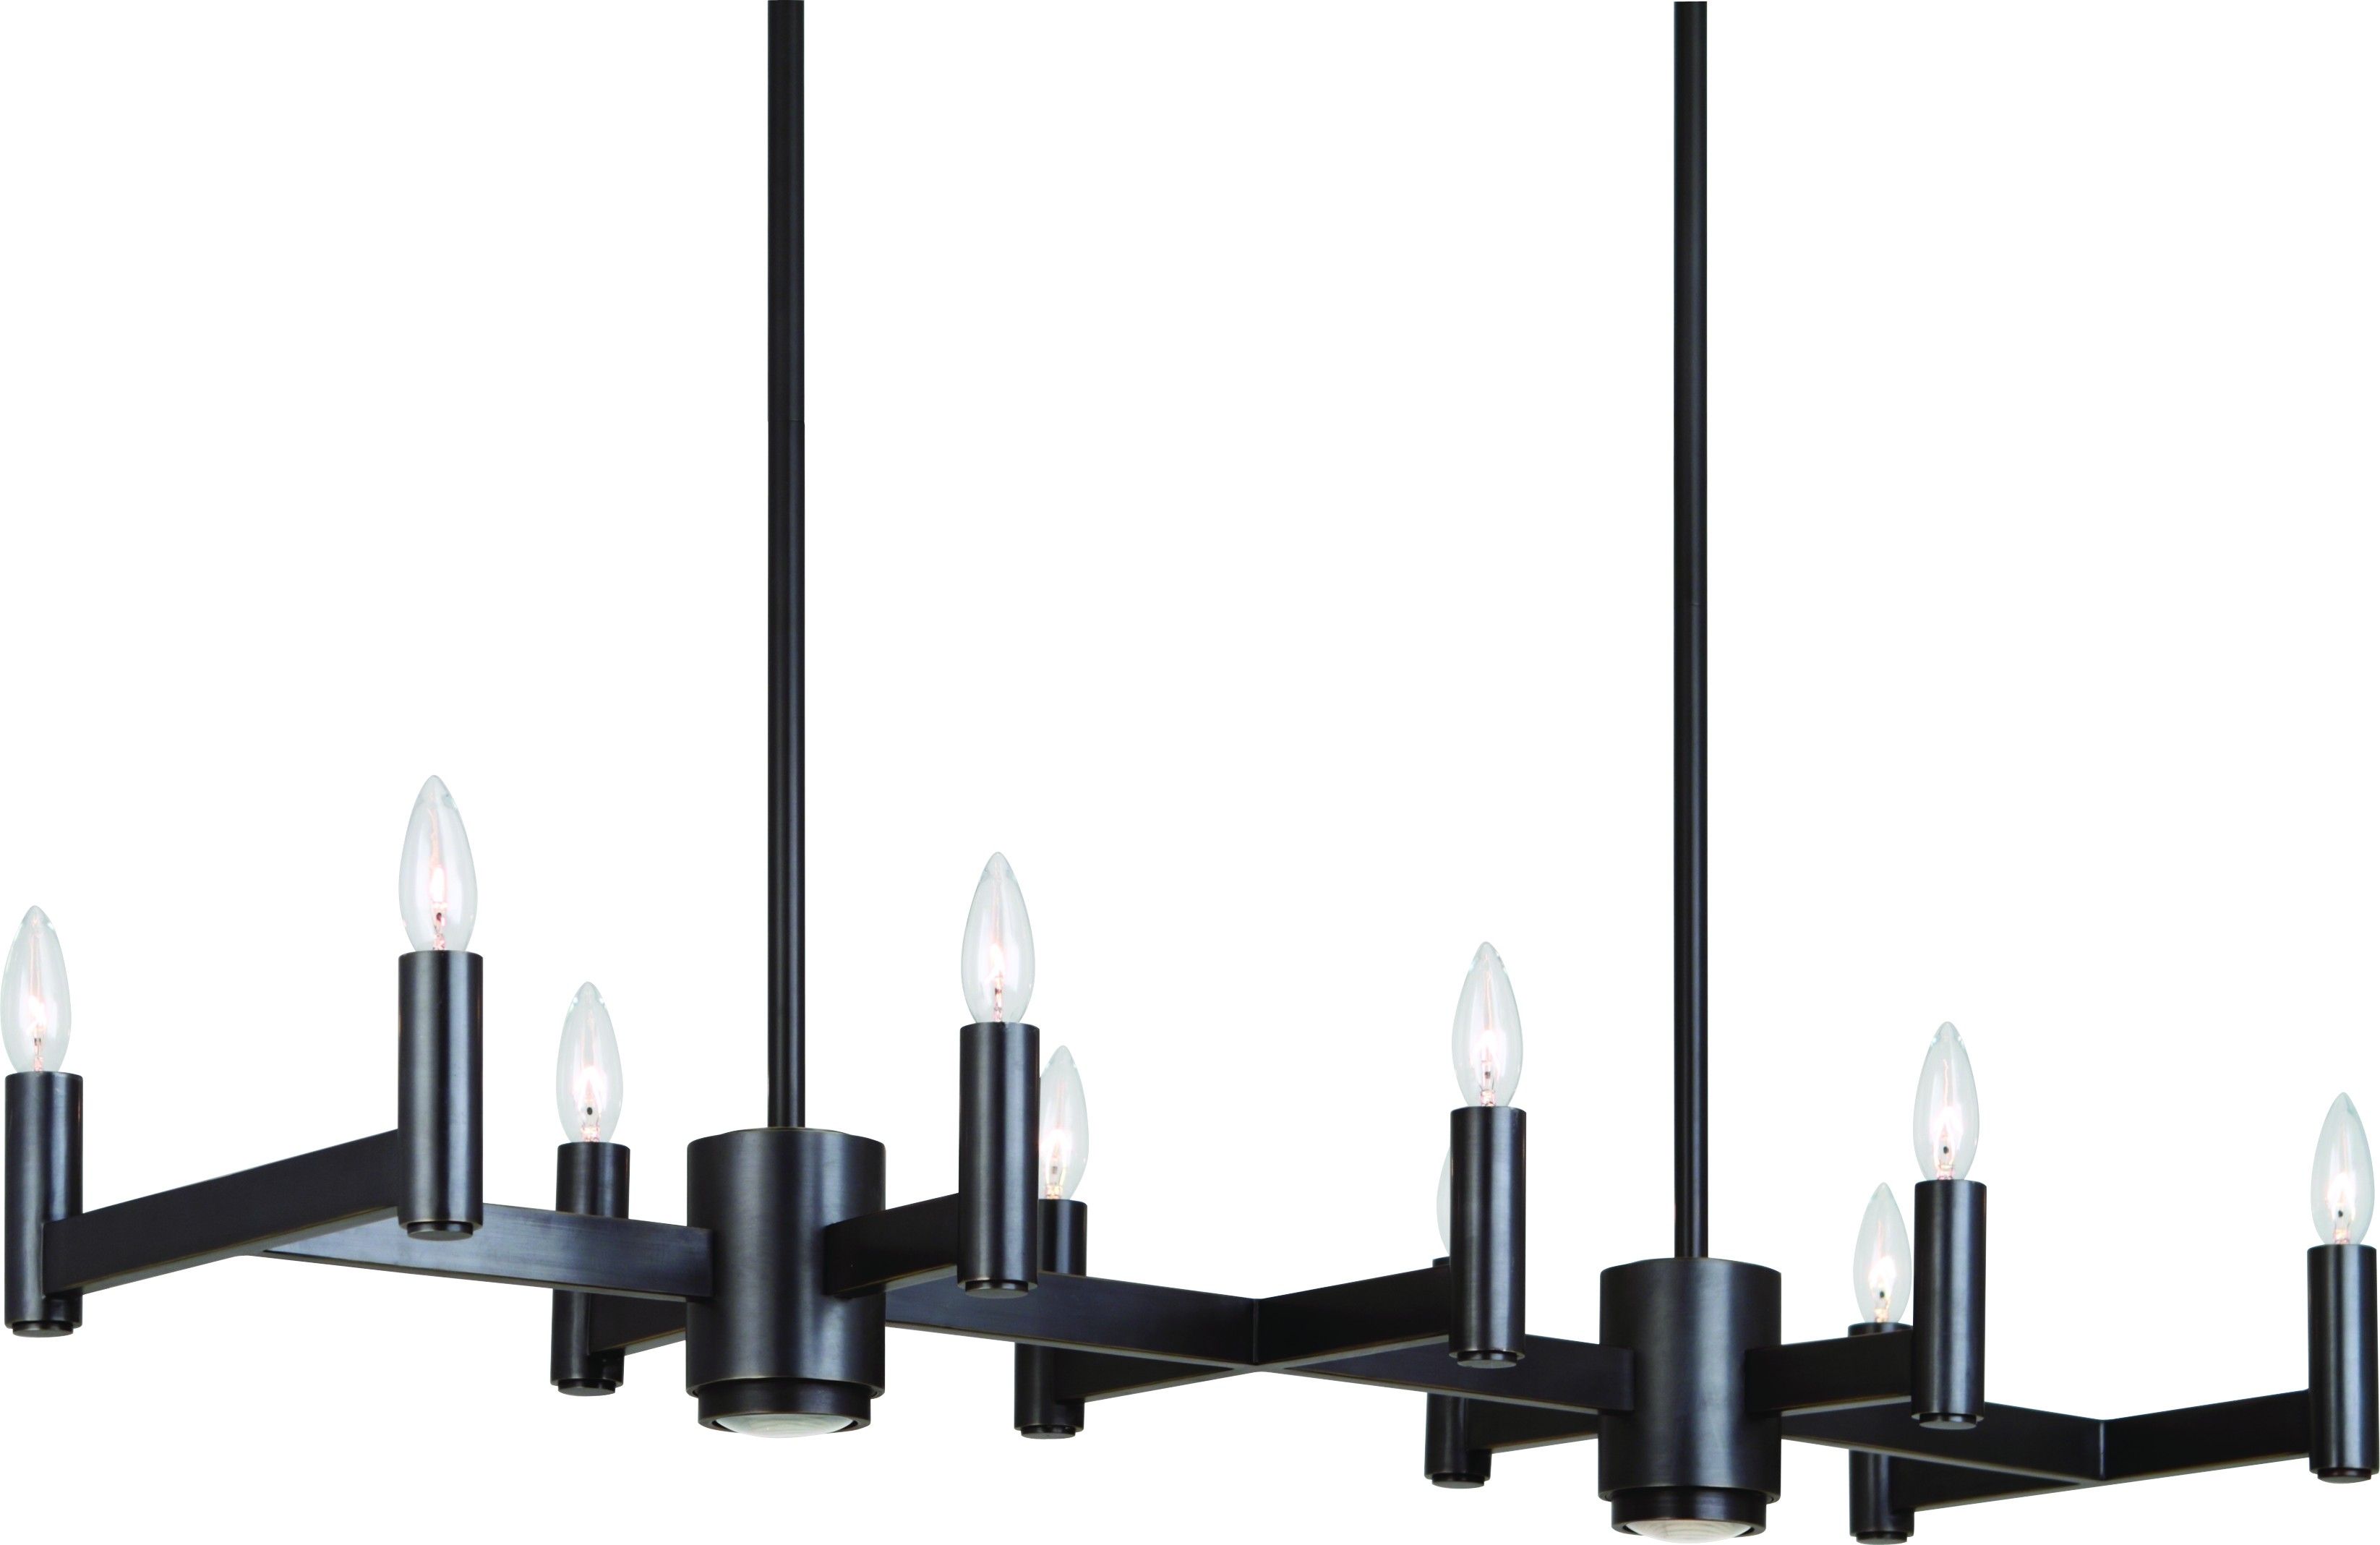 Black Wrought Iron Chandelier Lighting Roselawnlutheran Throughout Modern Wrought Iron Chandeliers (View 4 of 12)